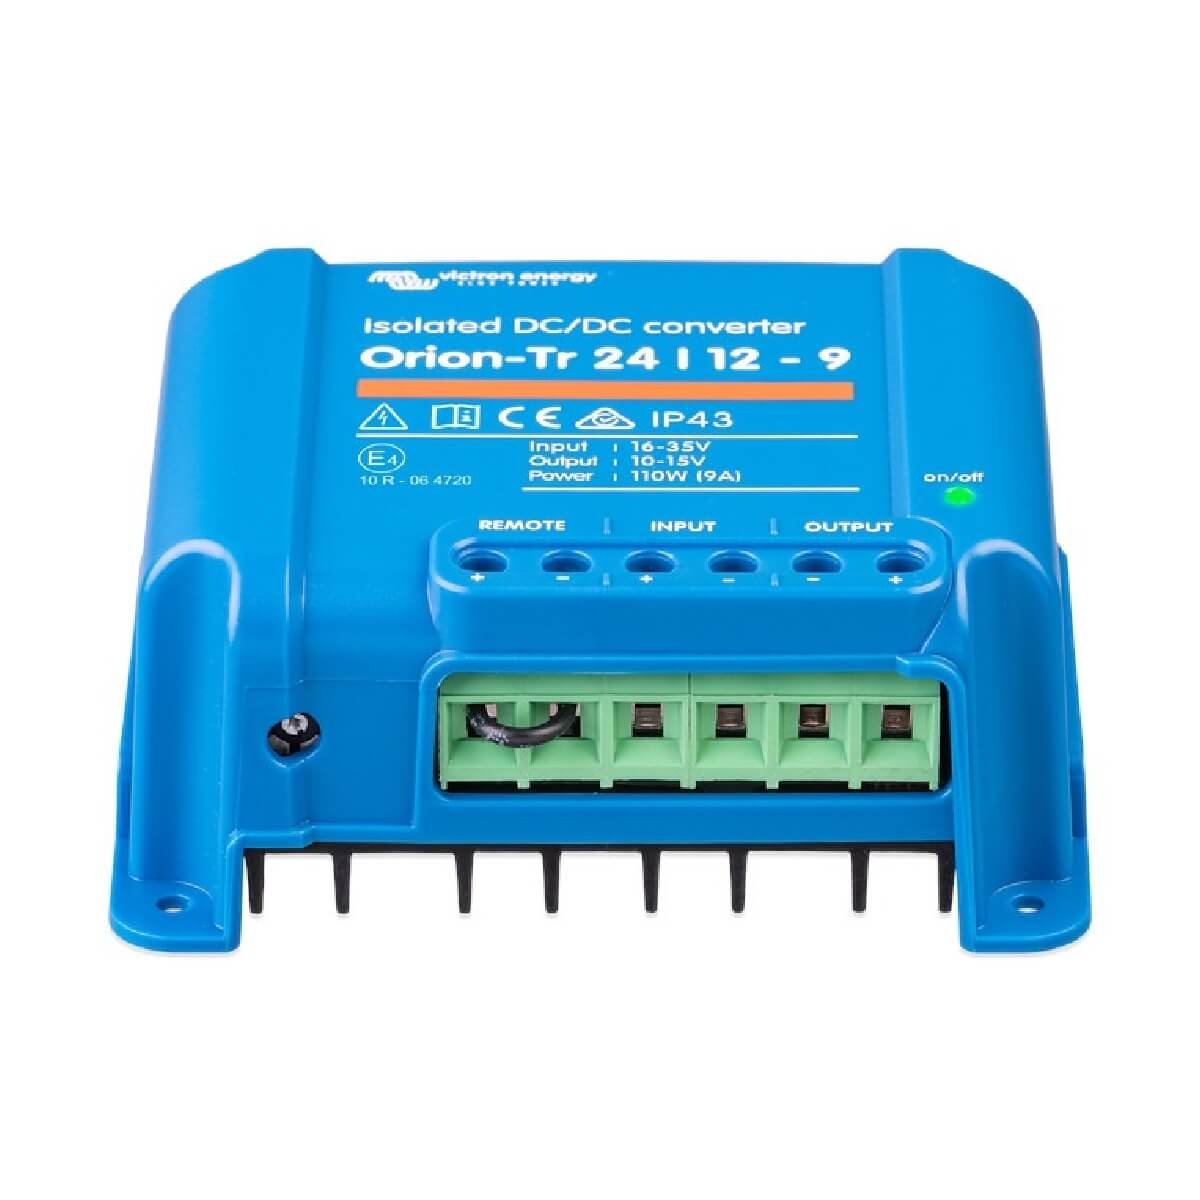 The Victron Orion-Tr 24/12-9 DC-DC Converter - 24V to 12V 9A Isolated Converter features green input/output connectors and detailed specifications on top.